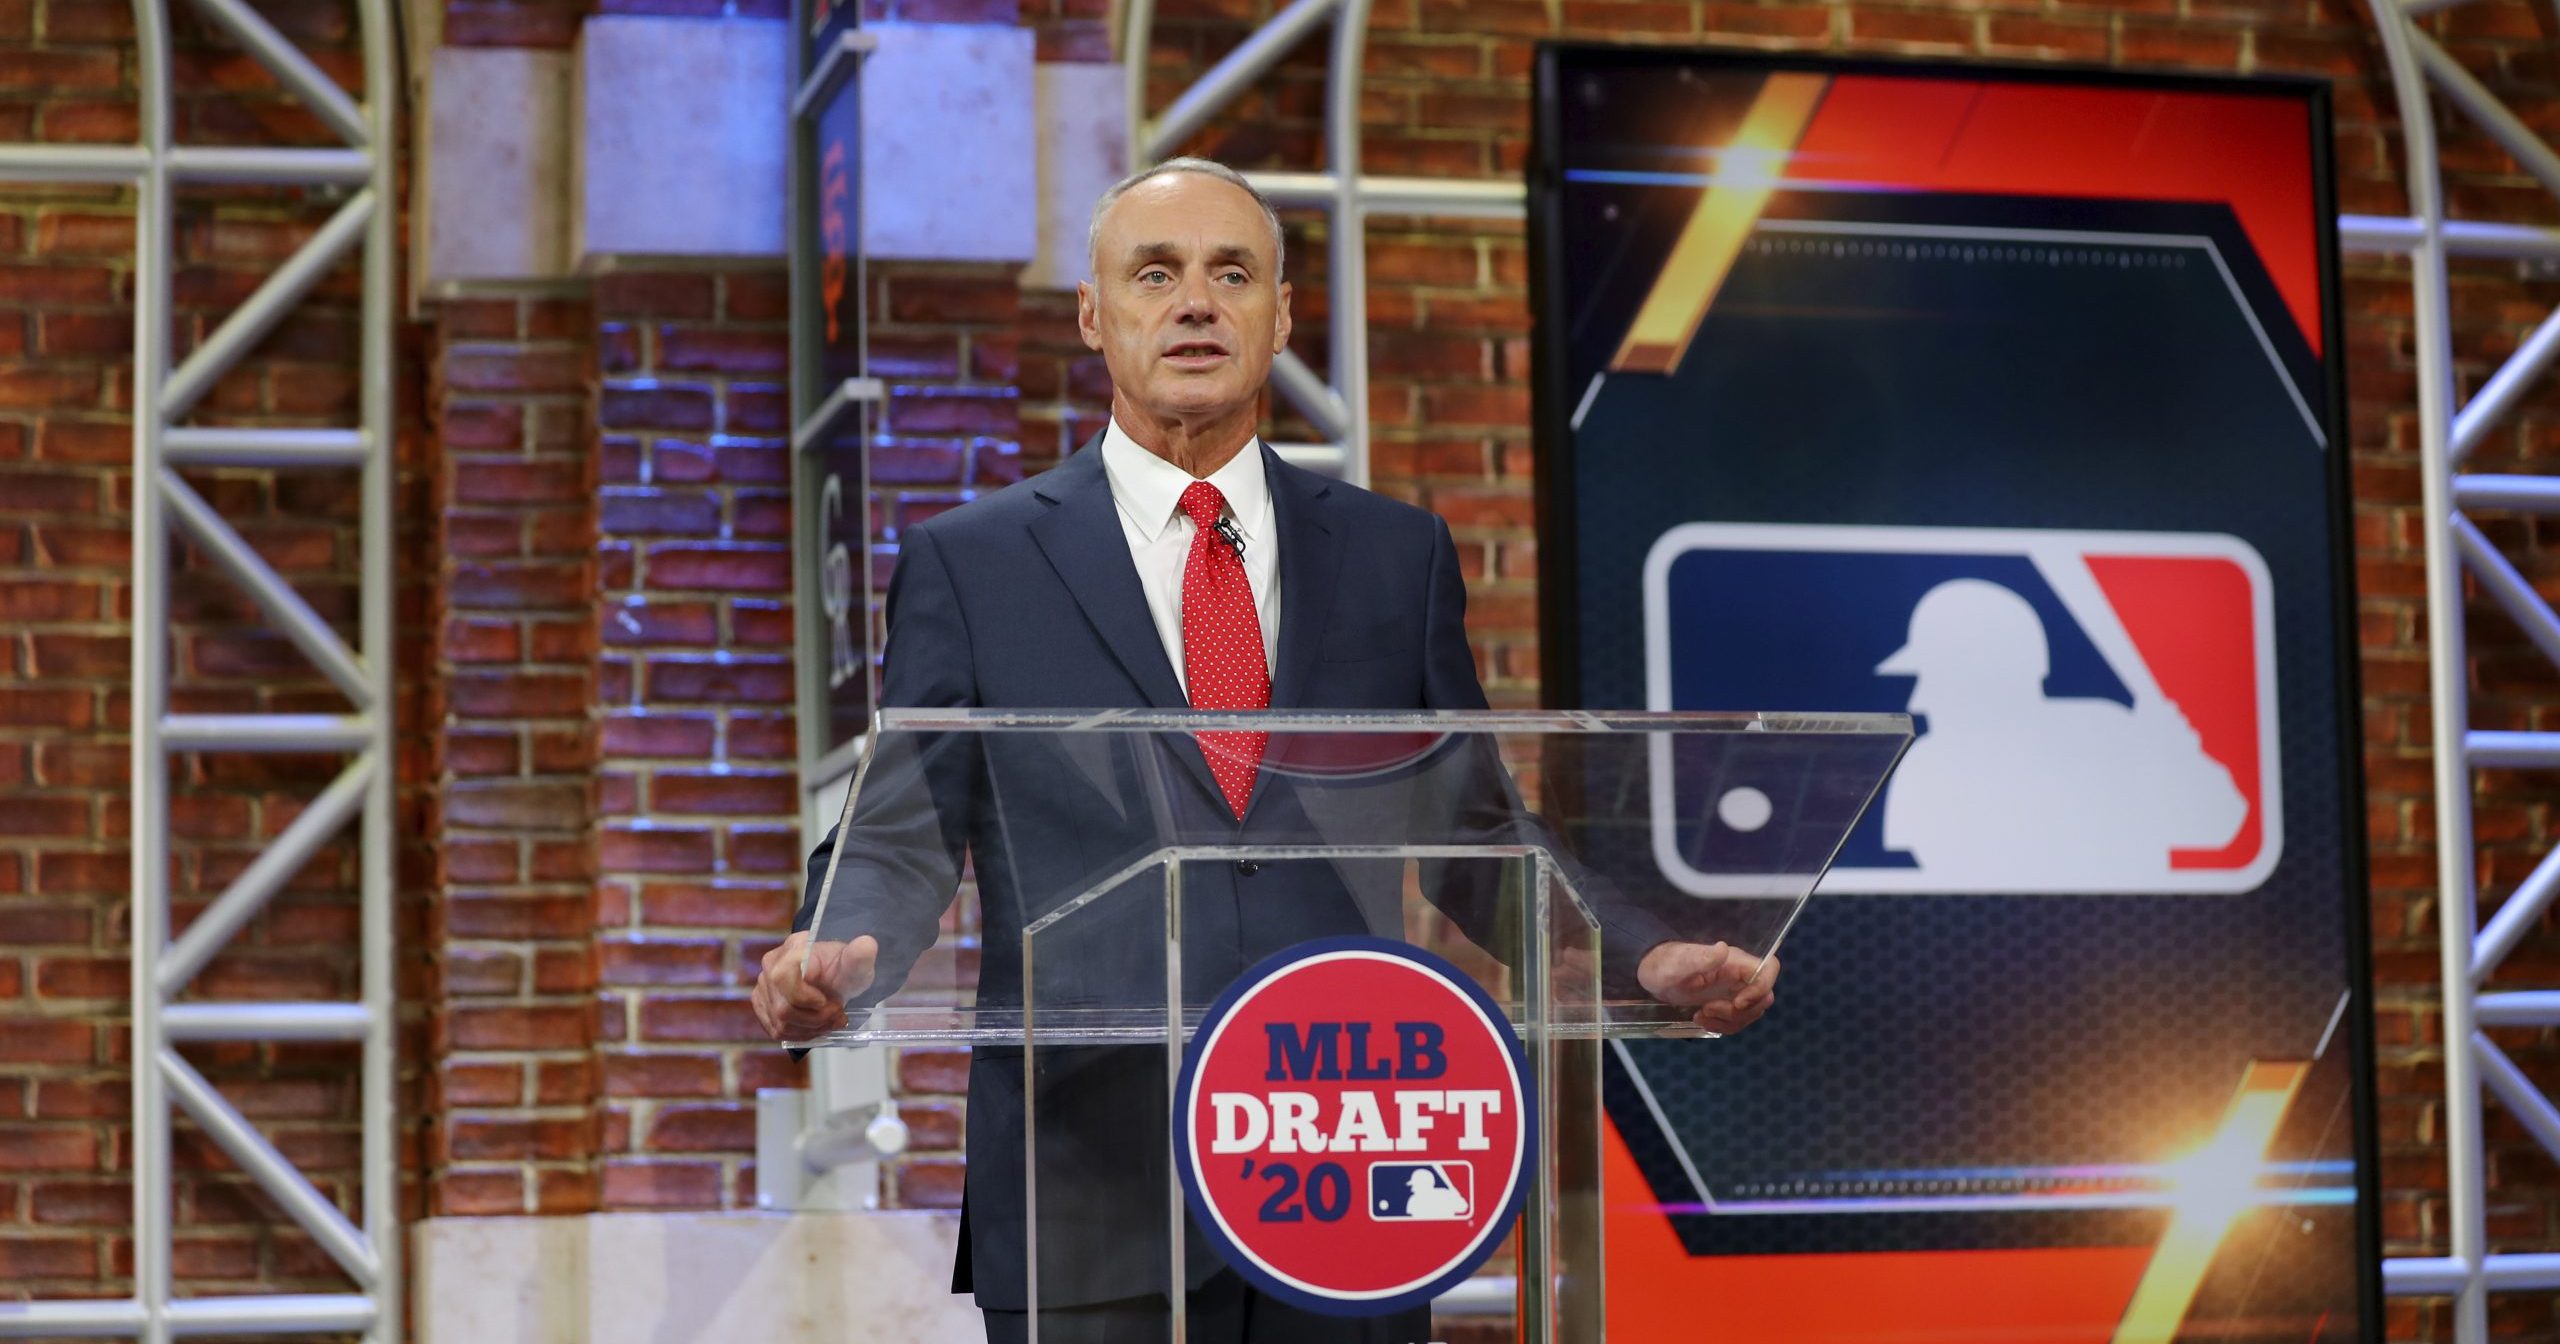 Baseball Commissioner Robert D. Manfred Jr. makes an opening statement during the baseball draft Wednesday, June 10, 2020, in Secaucus, New Jersey.